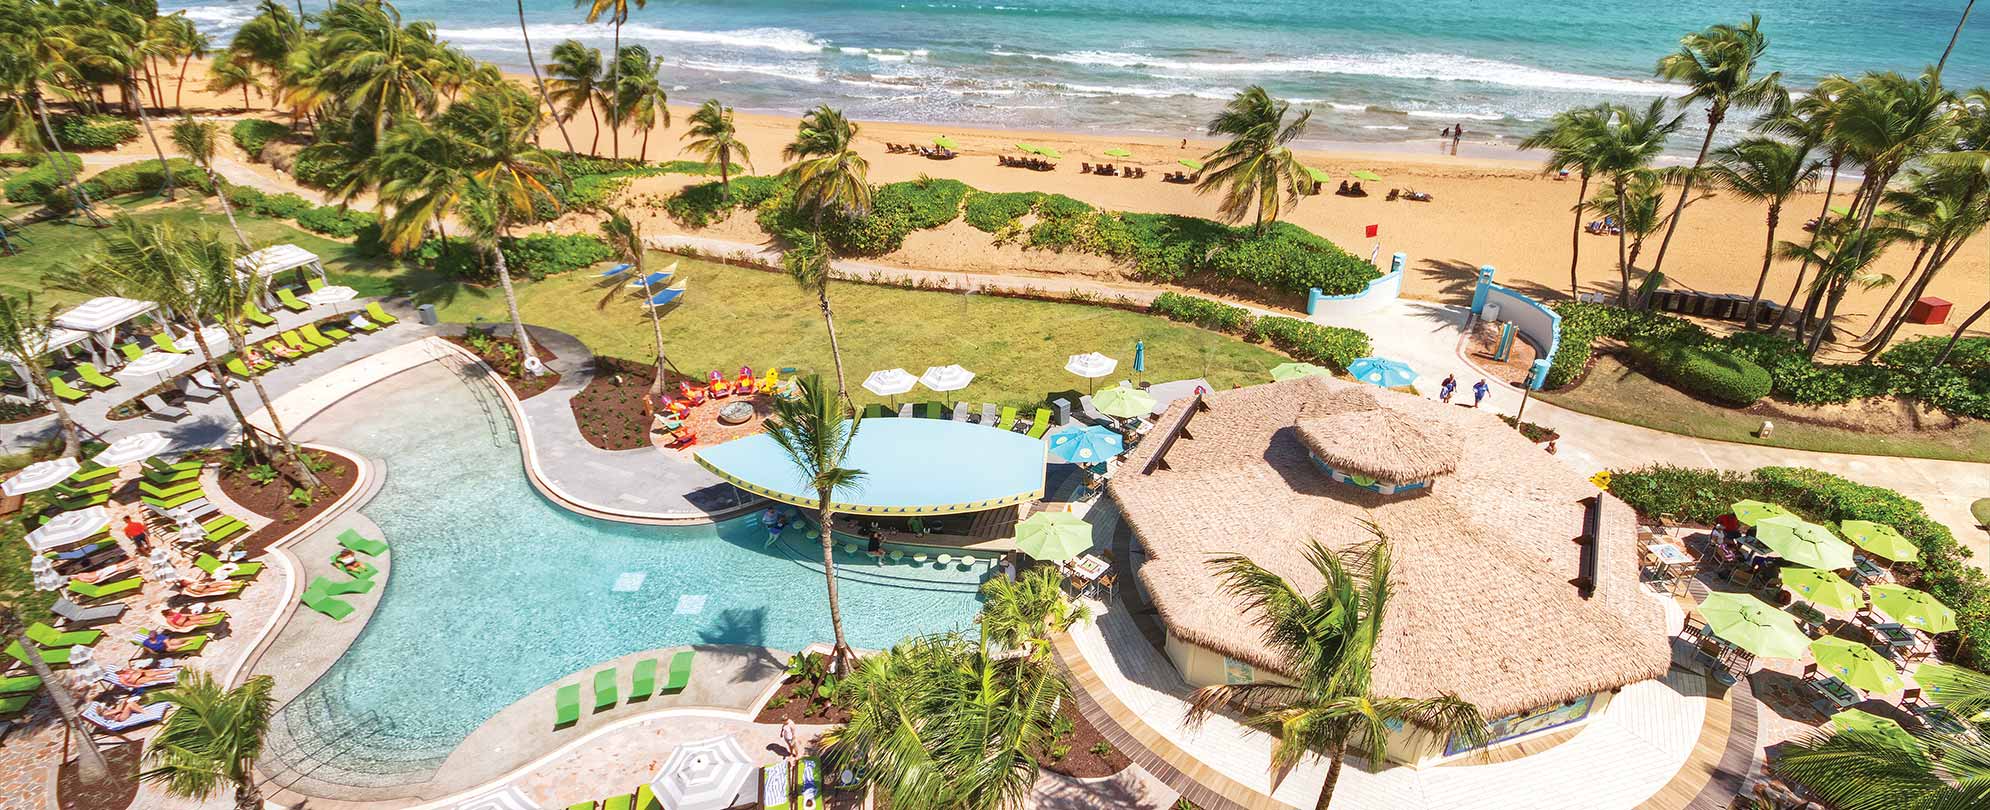 Birds-eye-view of the ocean and pool, with a boat-shaped swim-up bar, at Margaritaville Vacation Club by Wyndham - Rio Mar.